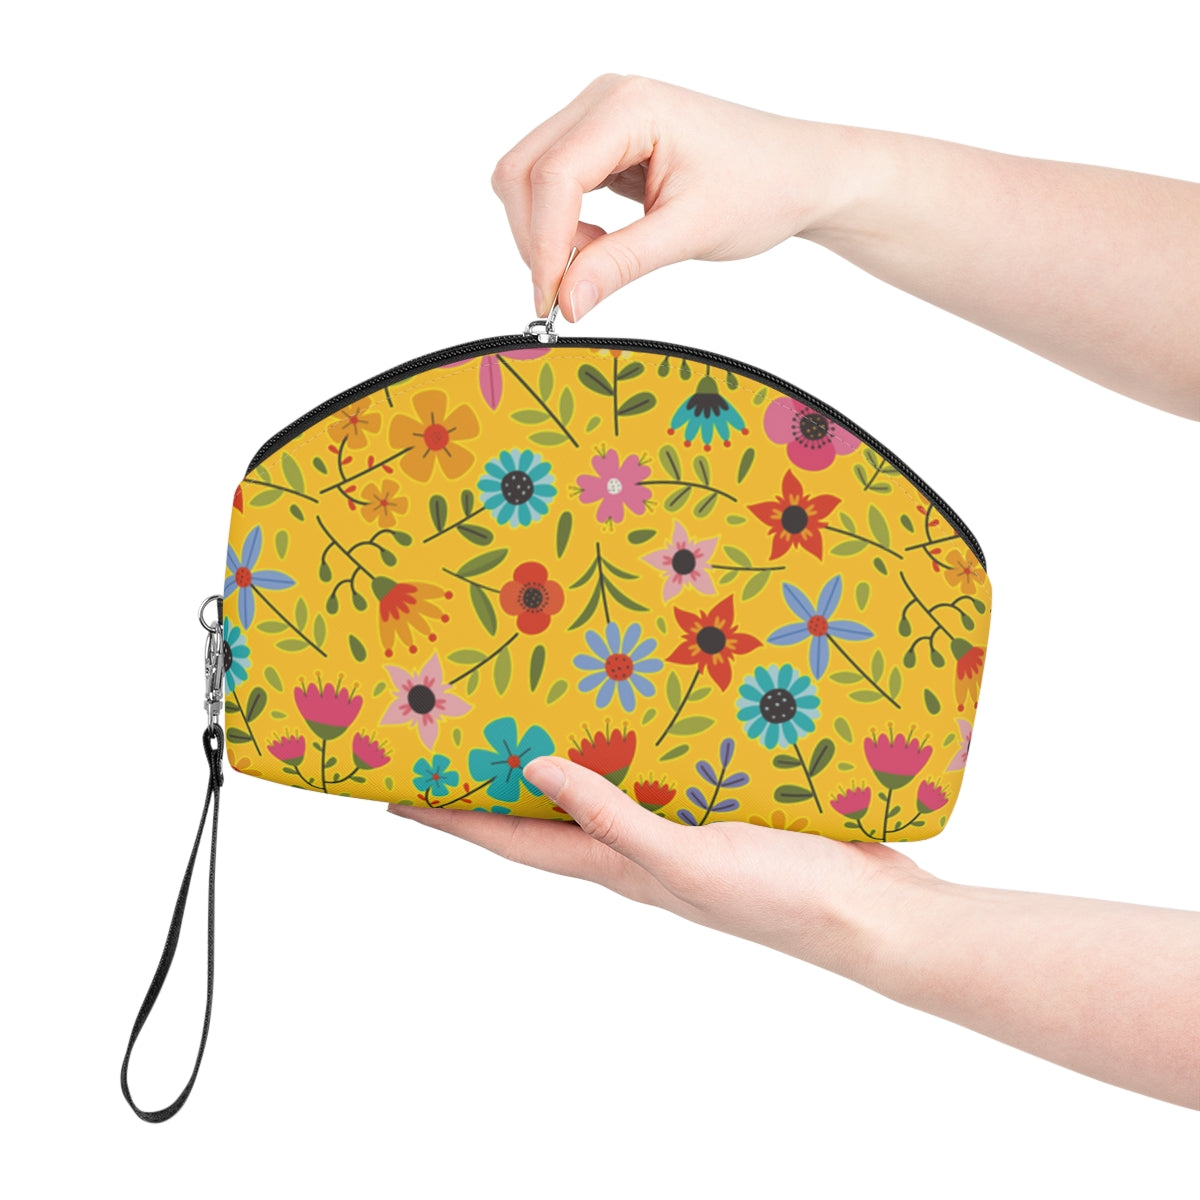 Playful Spring flowers - white - Makeup Bag – Nifty Ducks Co.